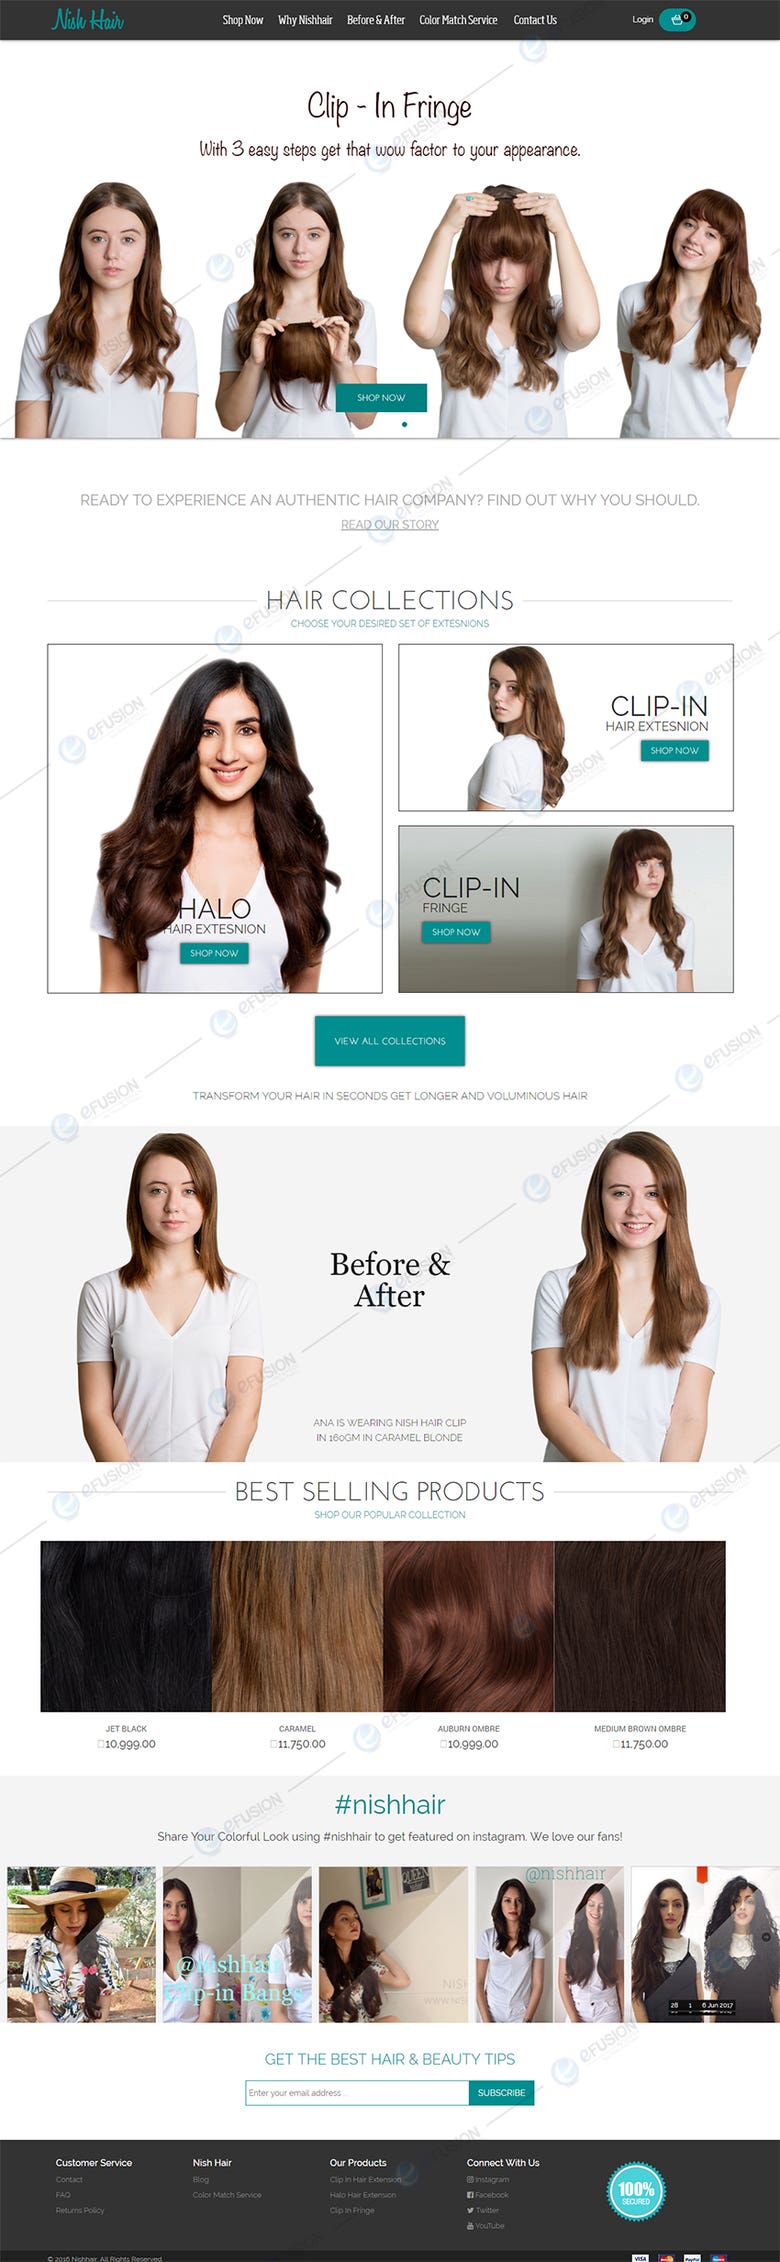 Online shop for Hair styling and needs | Magento